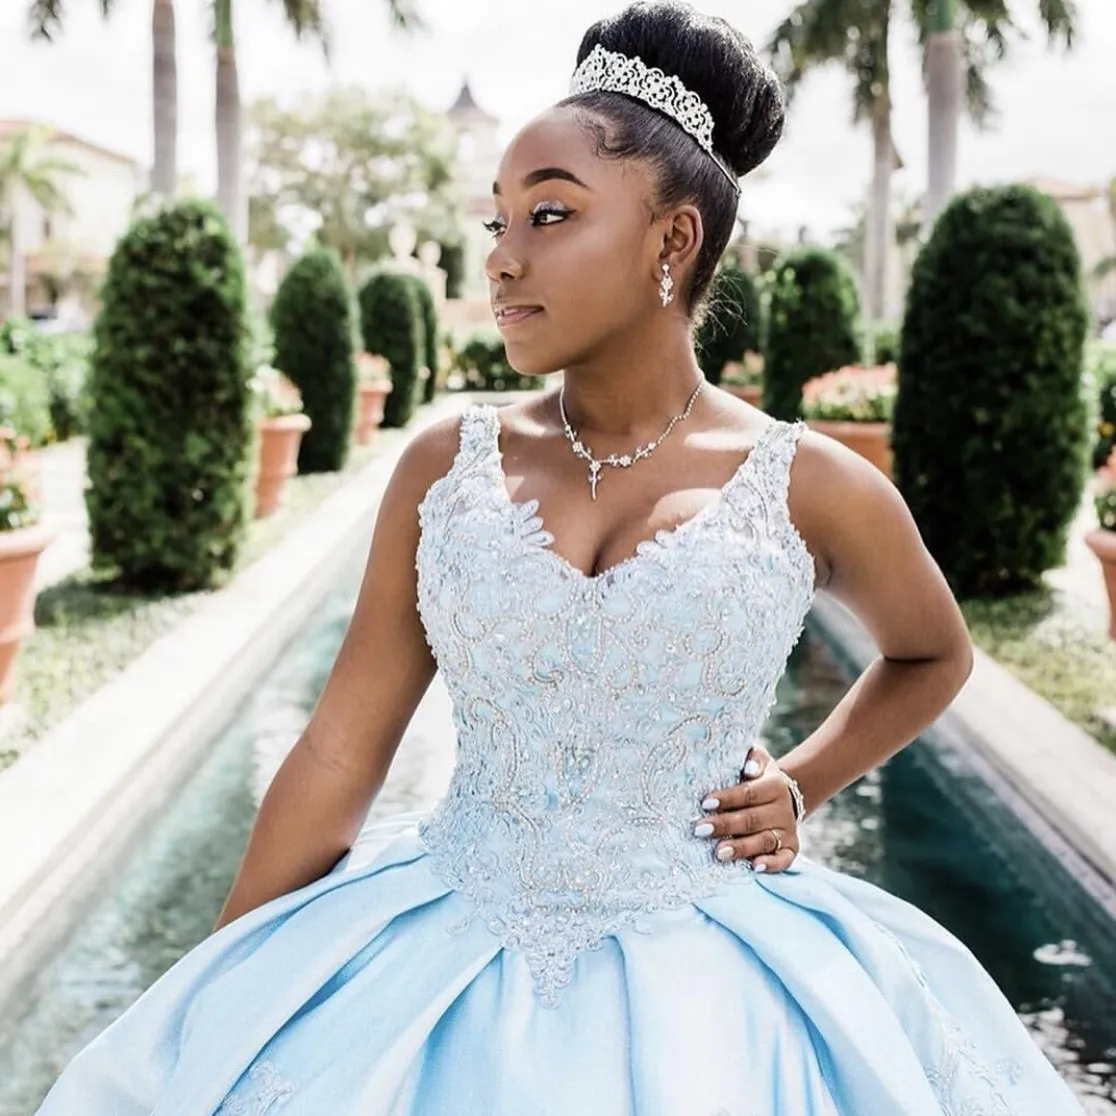 Sky Blue Ball Gown Quinceanera Dresses Bead Off Shoulder Sweet 16 Birthday  Party | eBay